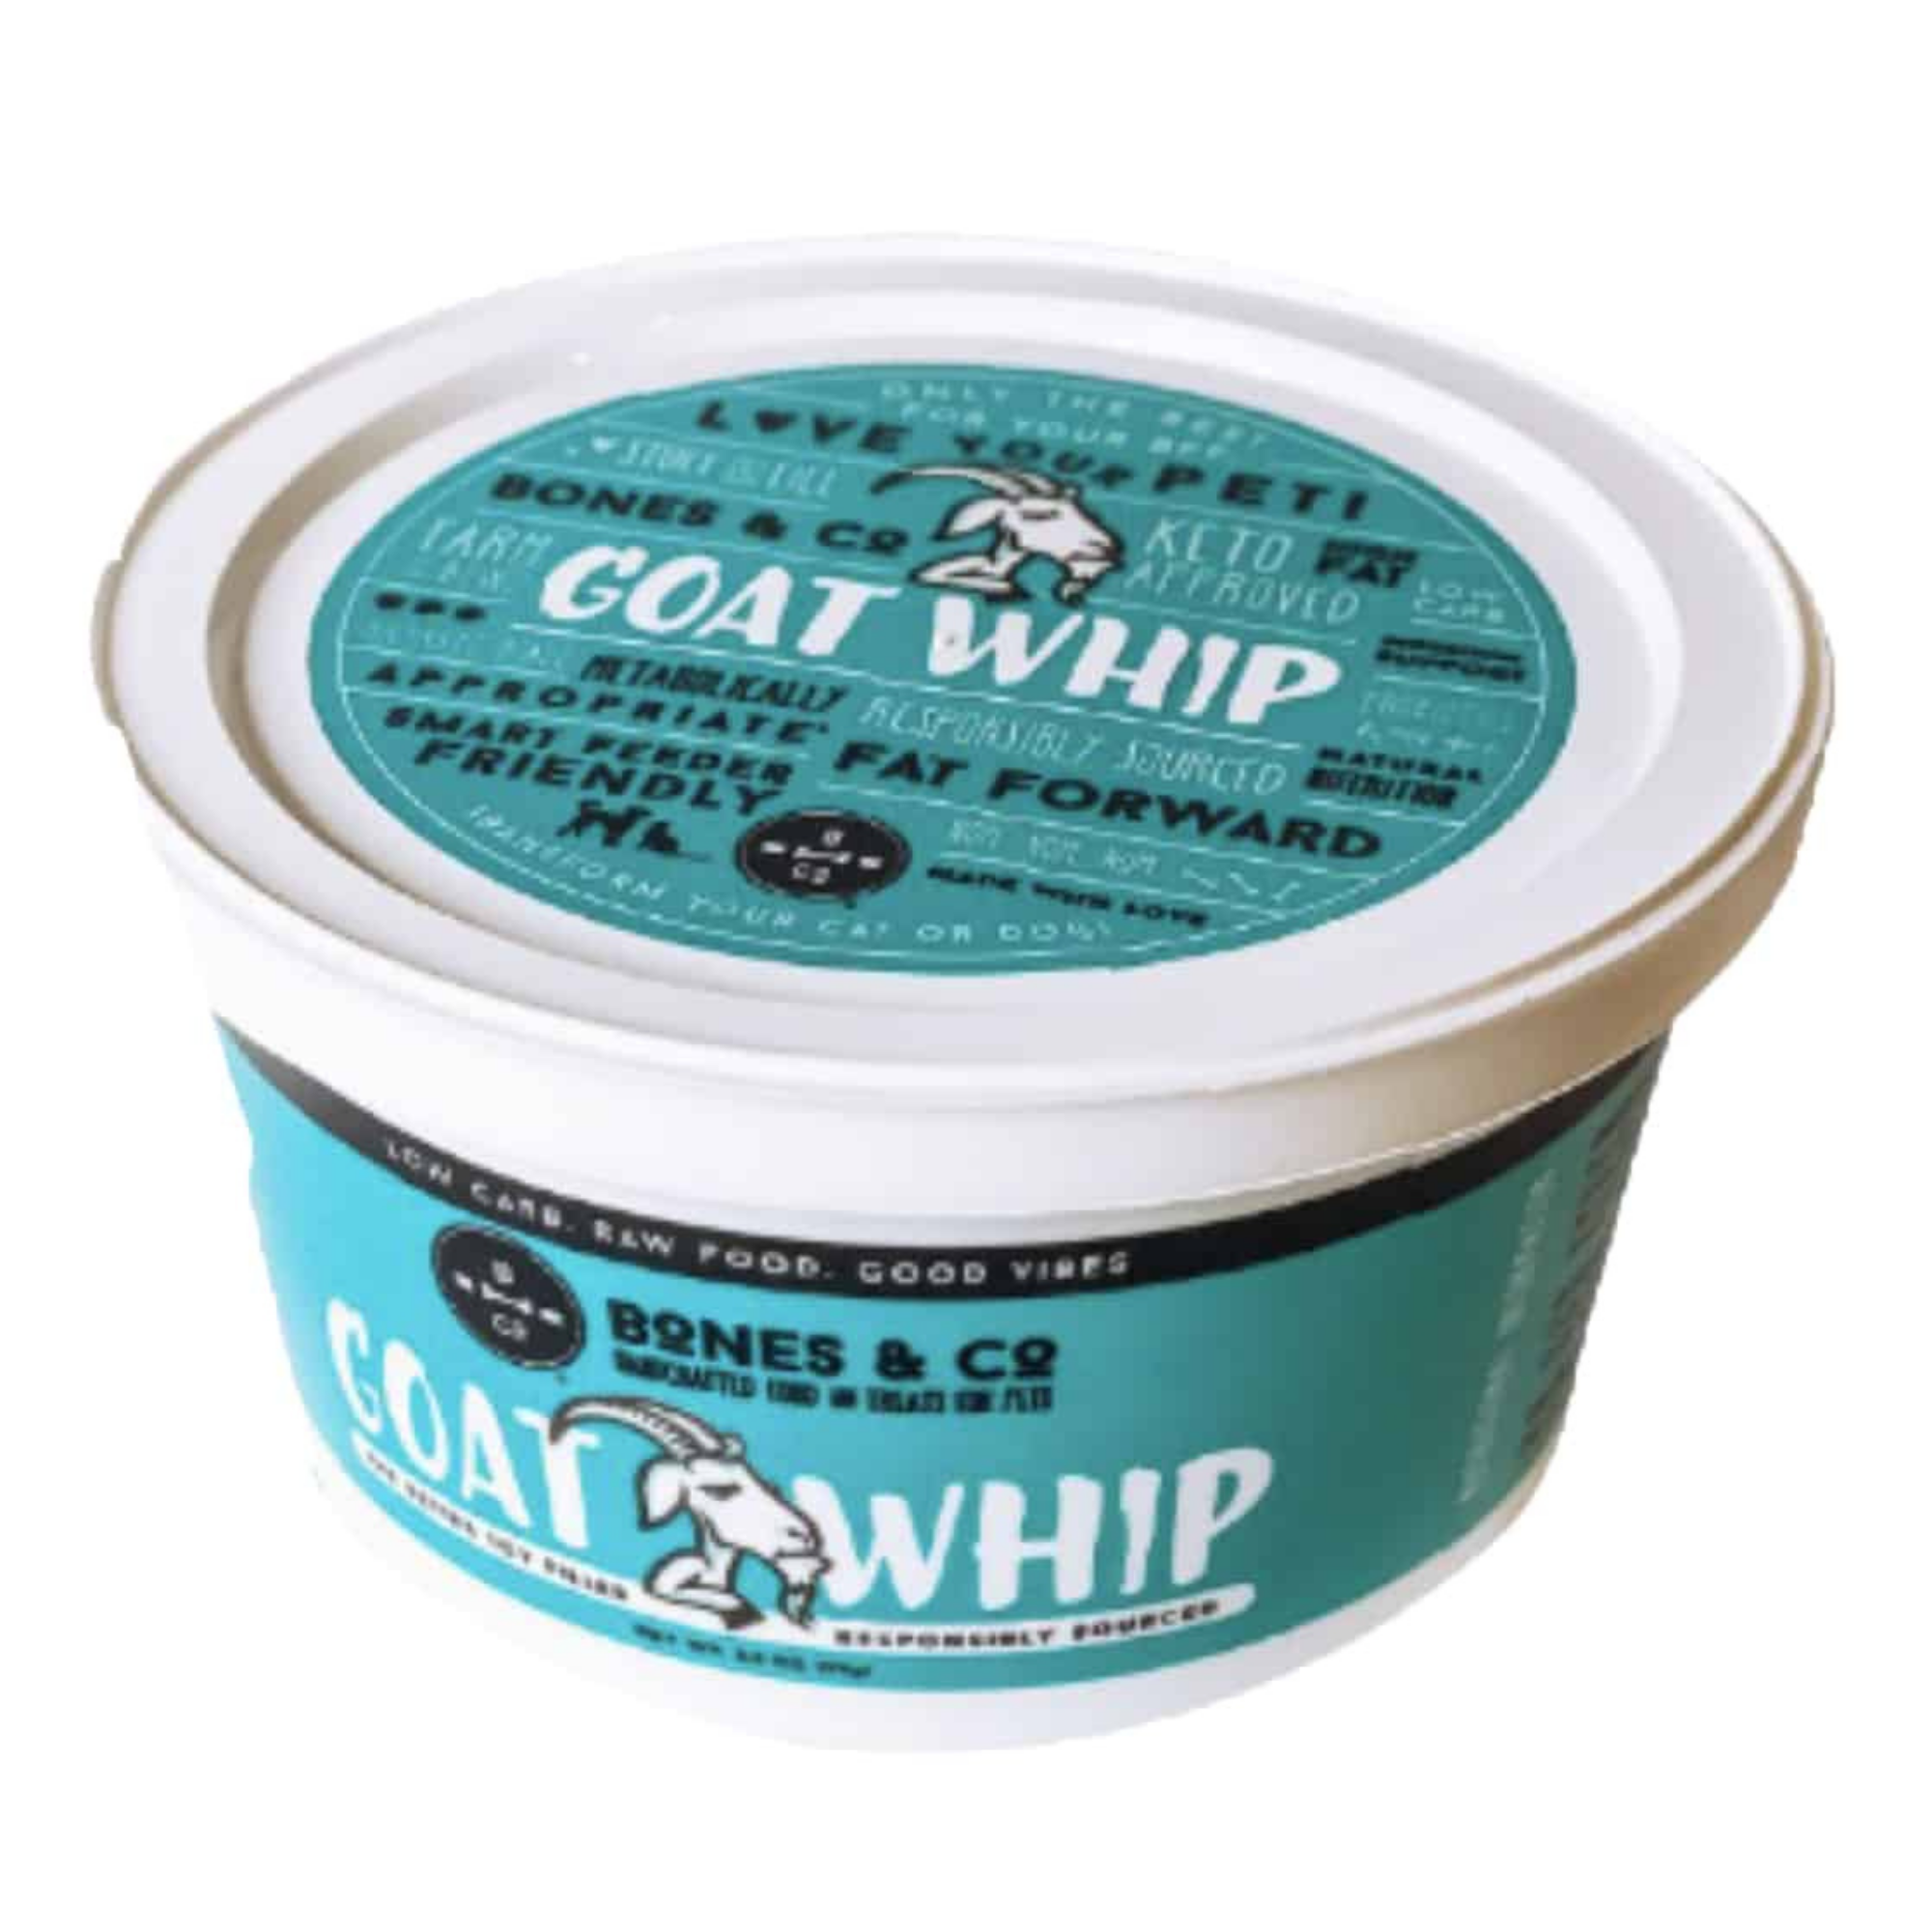 The Bones & Co Raw Frozen Goat Whip 3.5 oz - Mutts & Co.